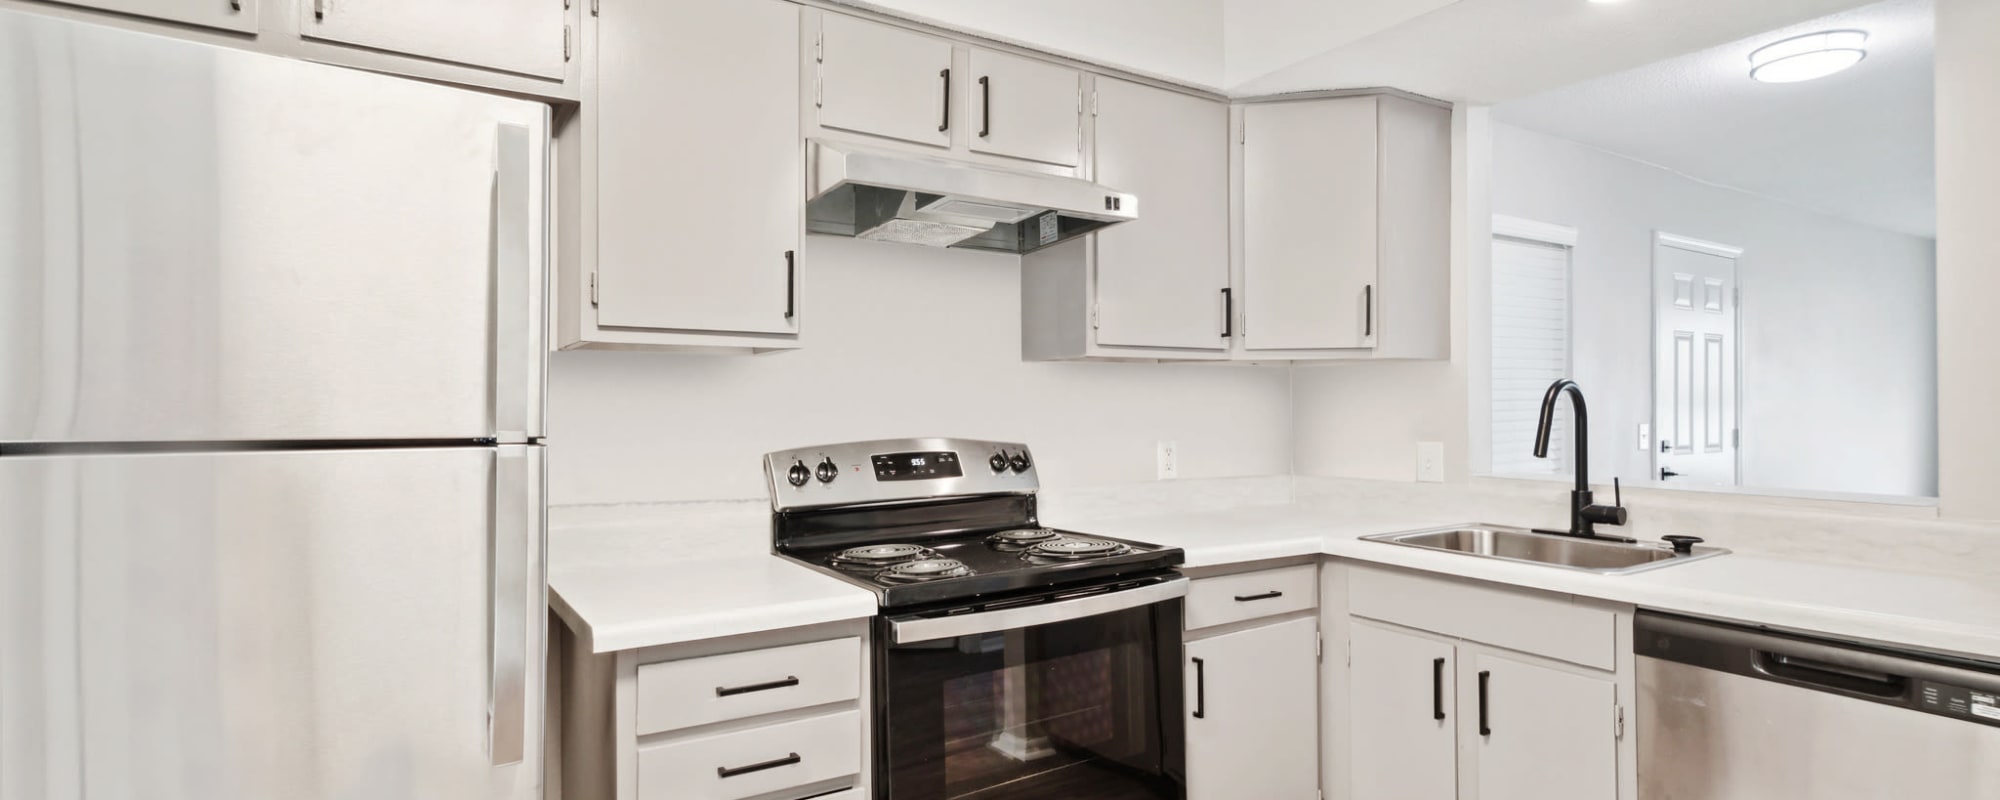 kitchen with appliances at The Maxwell in Metairie, Louisiana